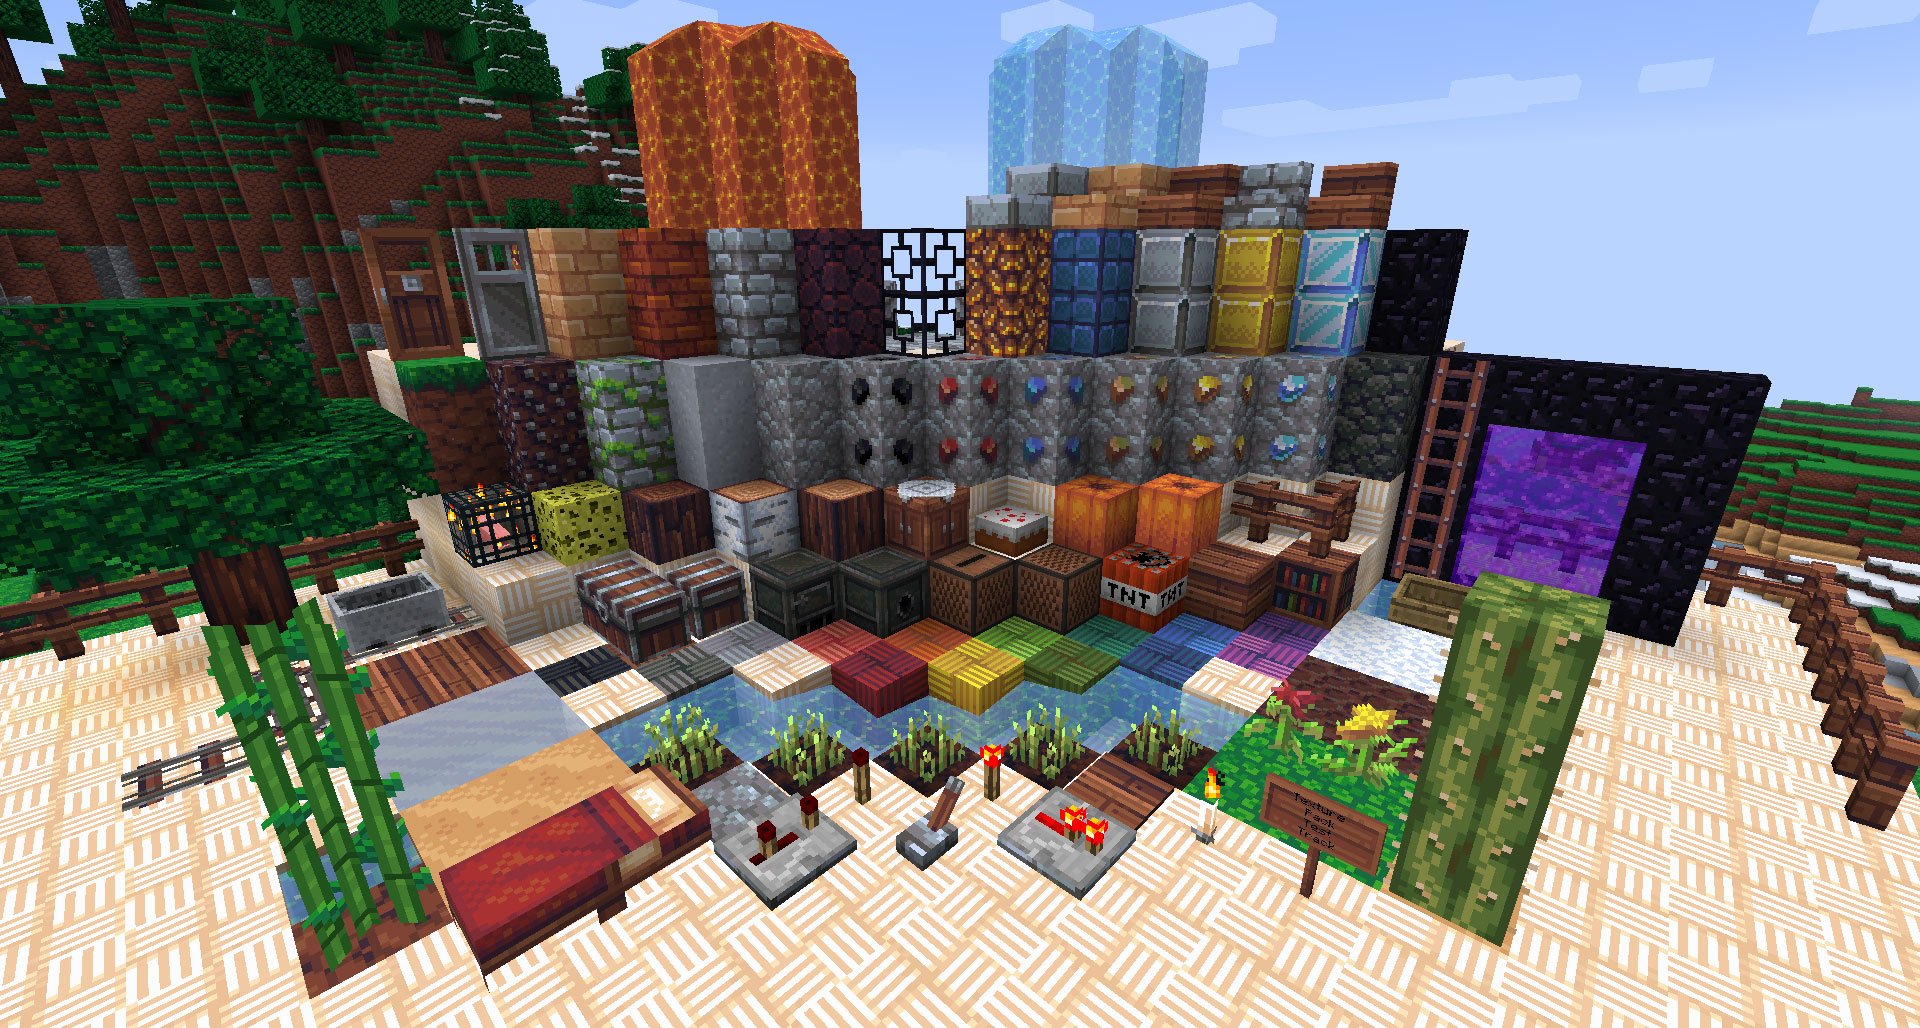 Classic Craft by Vivid Pixels - Minecraft Resource Pack Review 